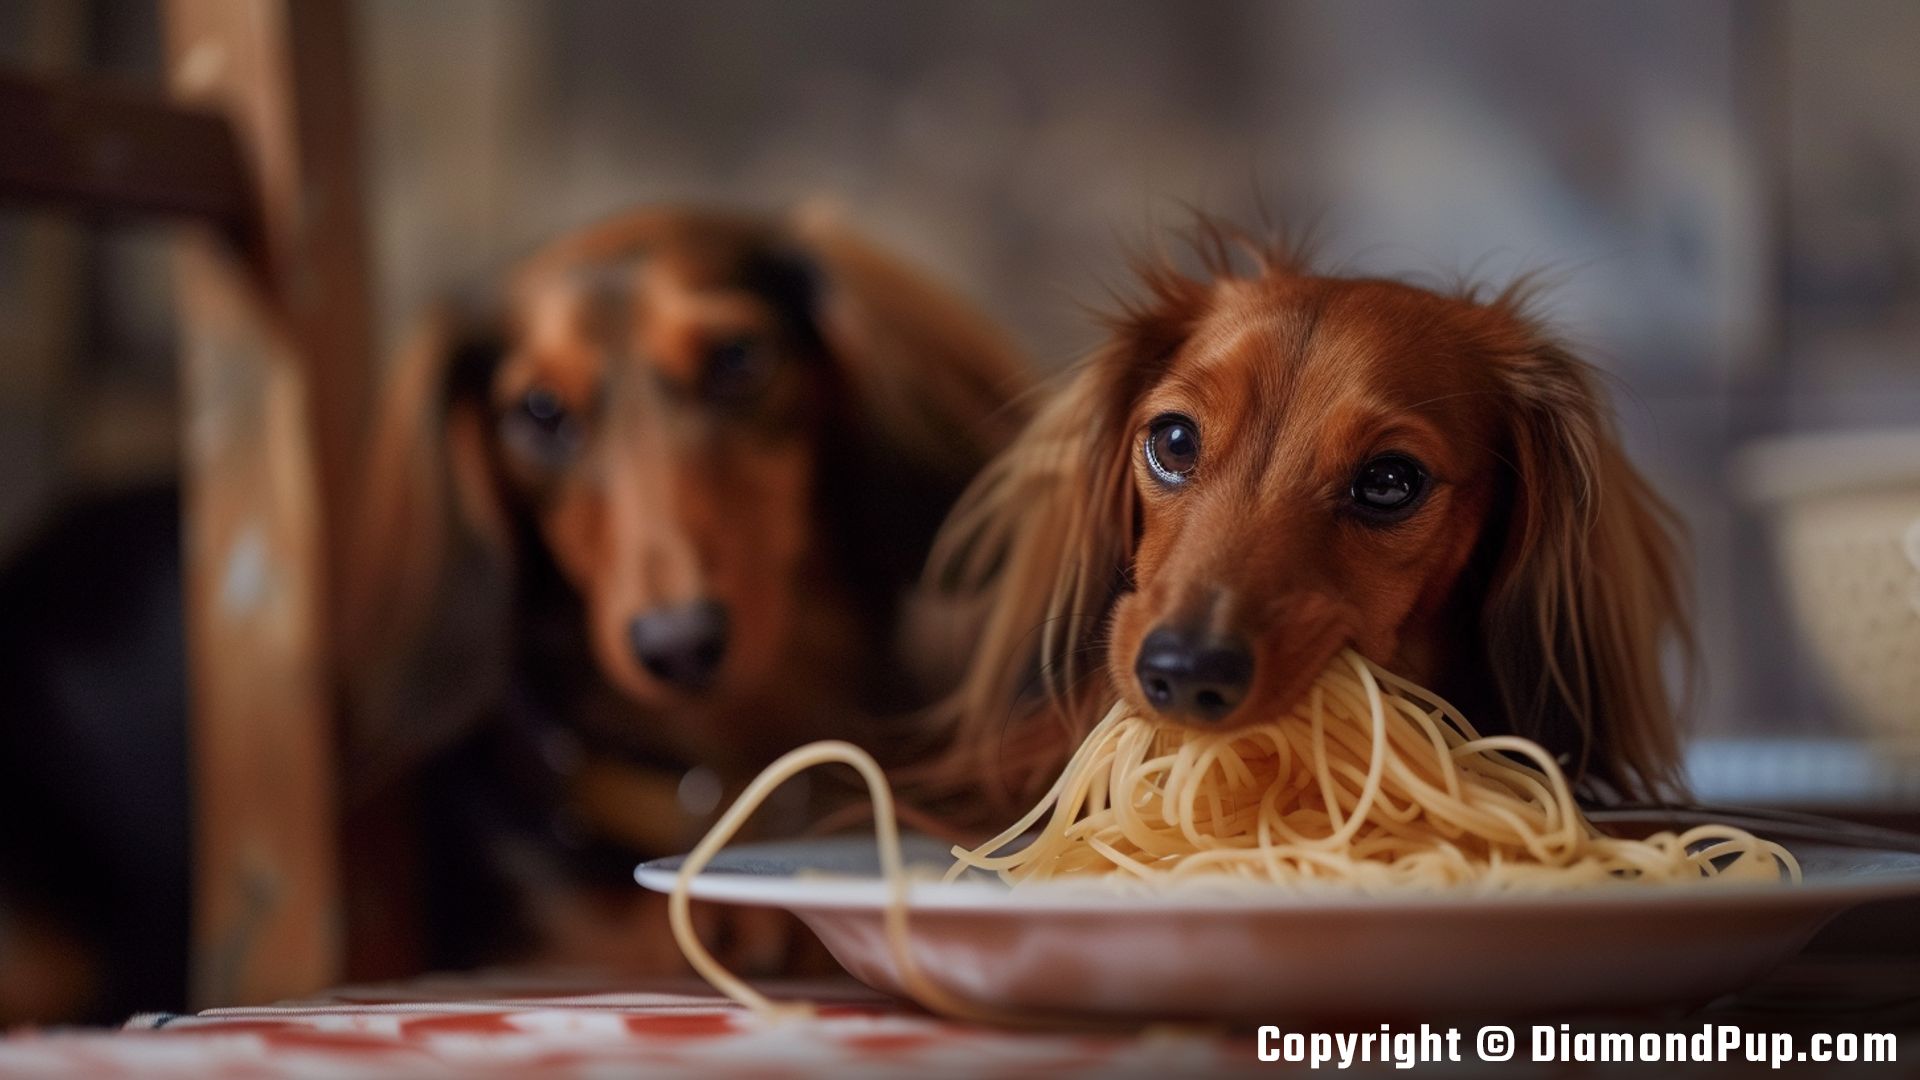 Image of a Cute Dachshund Snacking on Pasta